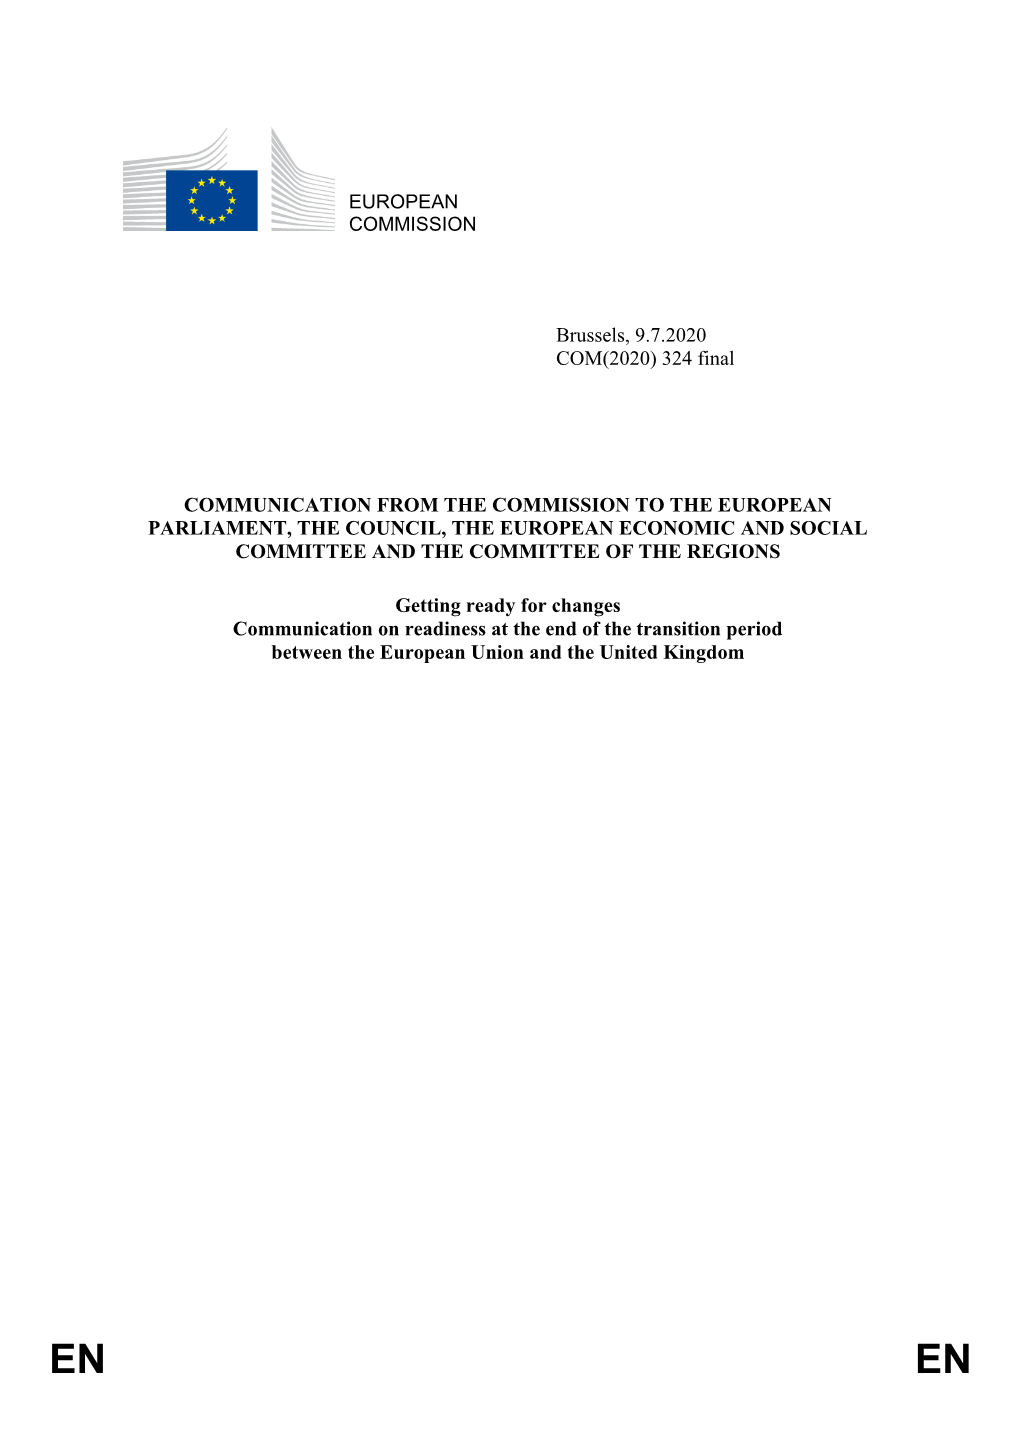 Communication on Readiness at the End of the Transition Period Between the European Union and the United Kingdom